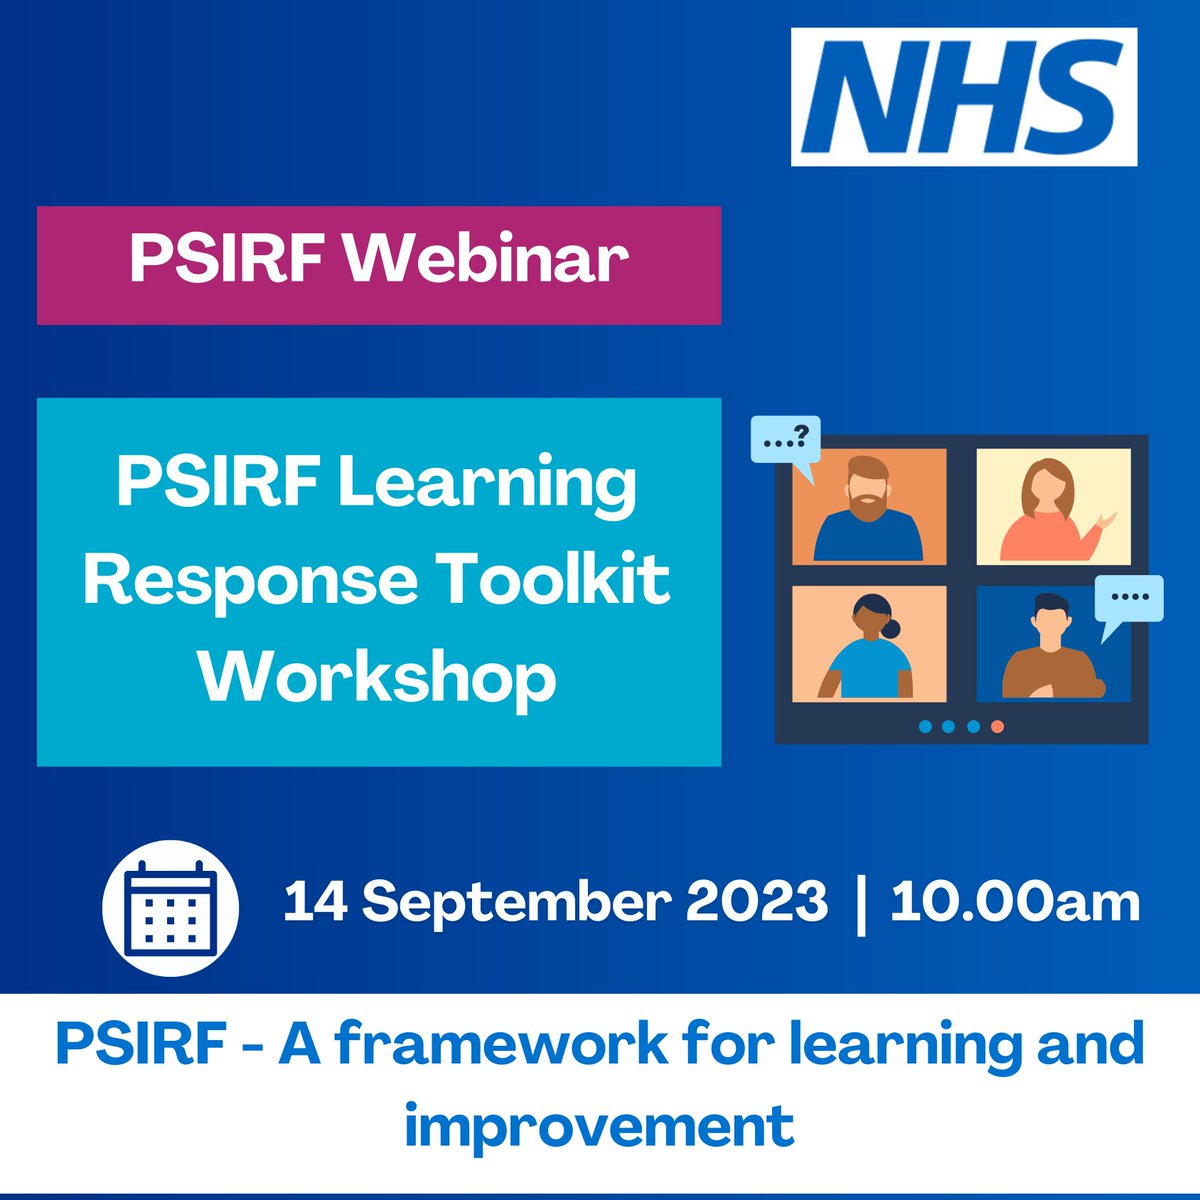 Register now for our #PSIRF Learning Response Toolkit webinar, taking place 14 September. Register here events.england.nhs.uk/events/psirf-l…